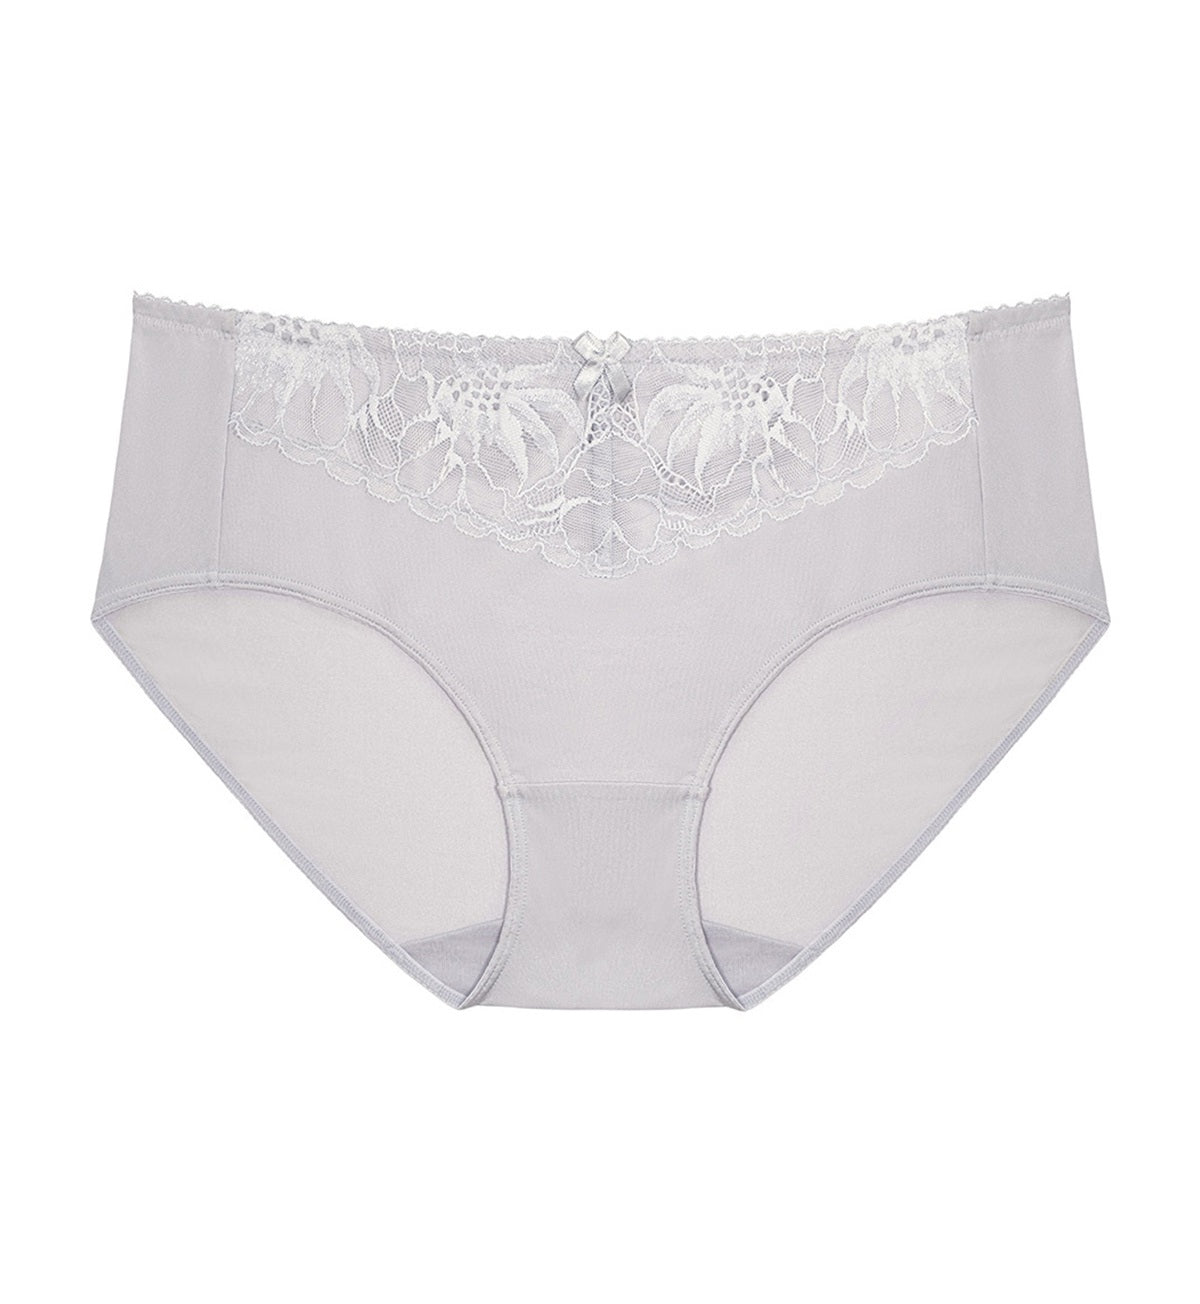 Ying Young - Everyday Essentials Classic Slip Panties Grey XS